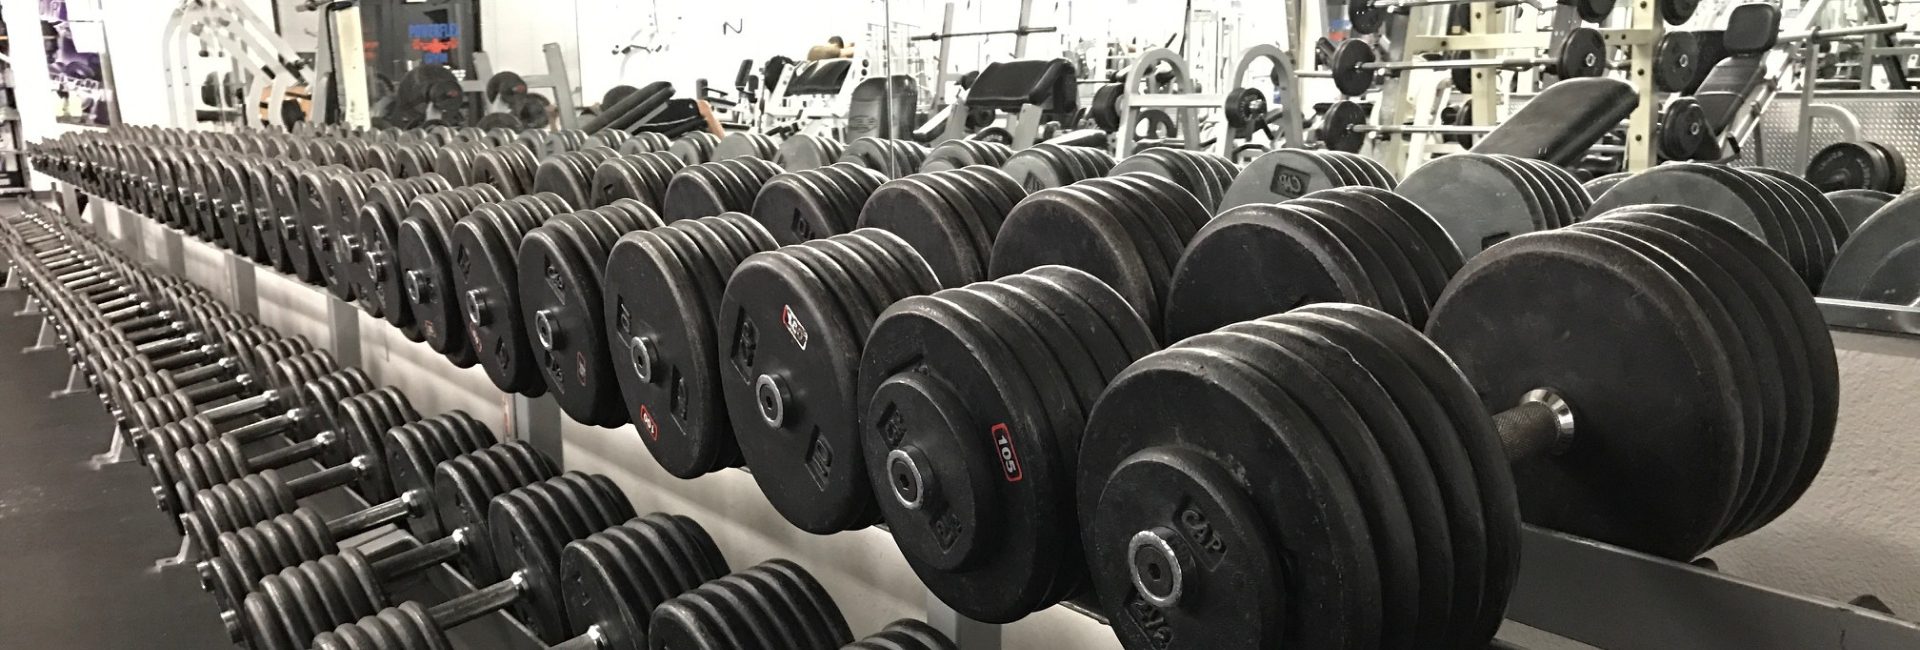 free weights lined up nicely at a albuquerque gym near me